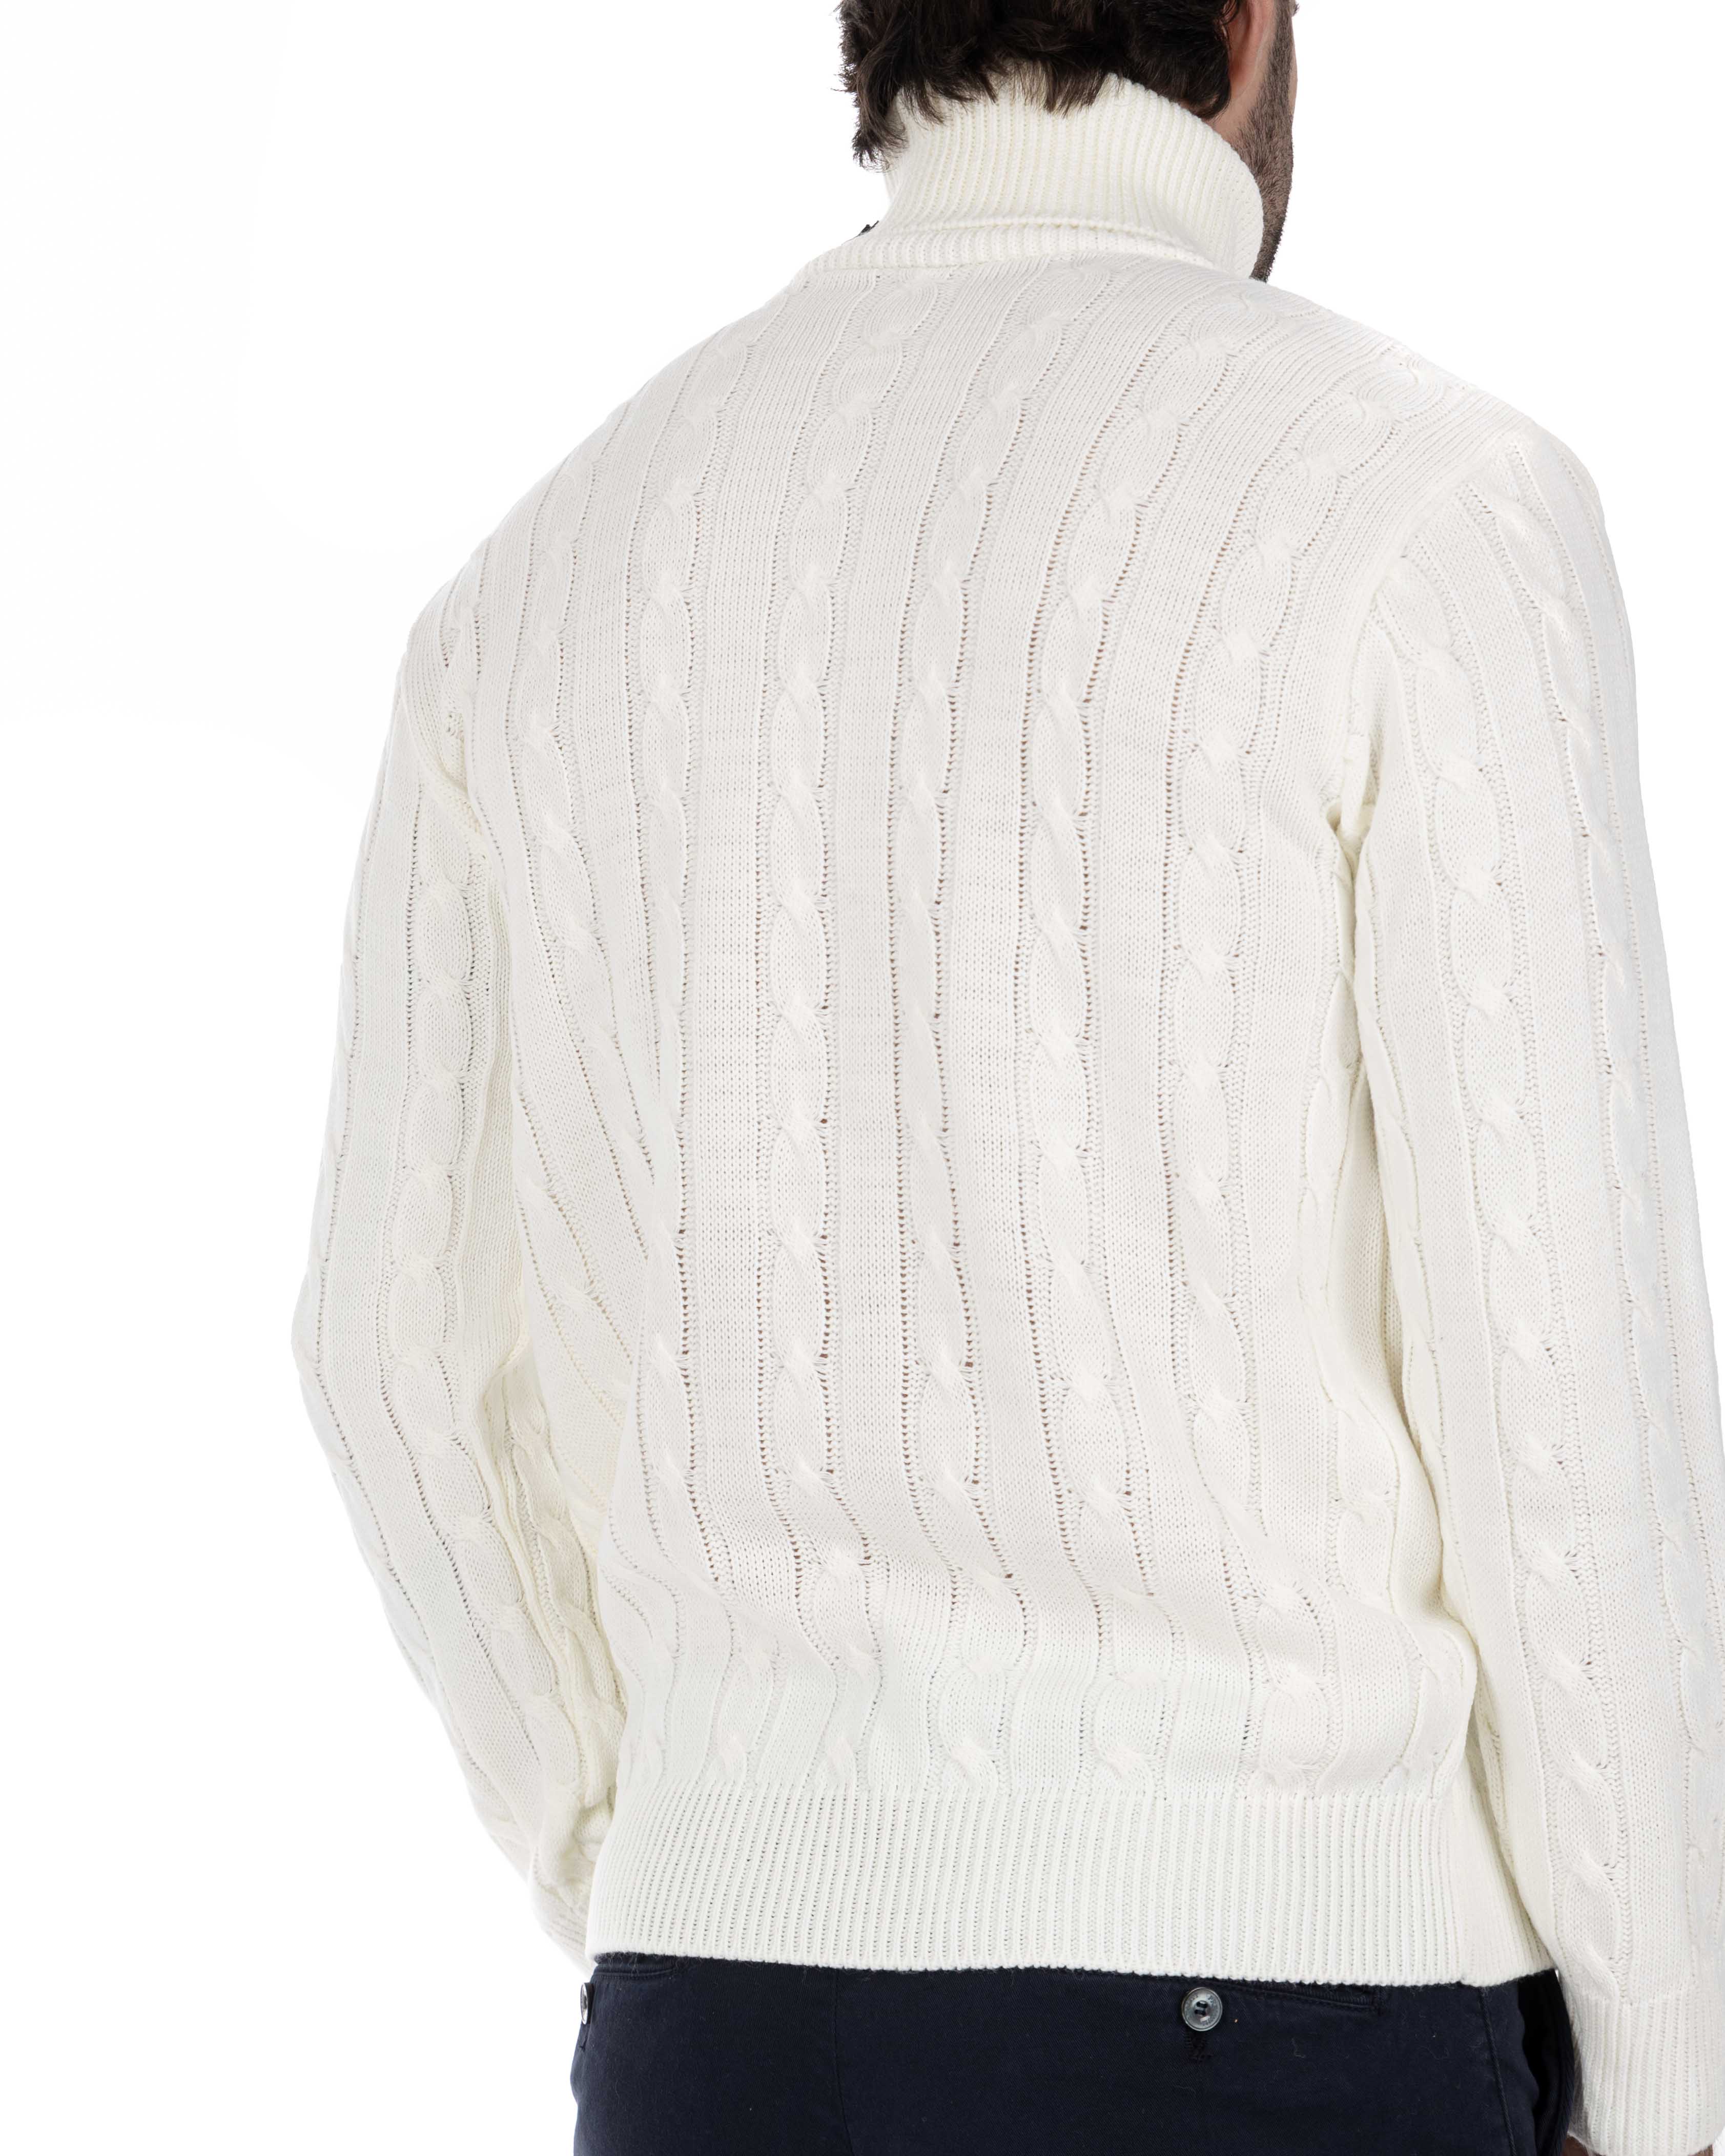 Crovie - white turtleneck sweater with cables